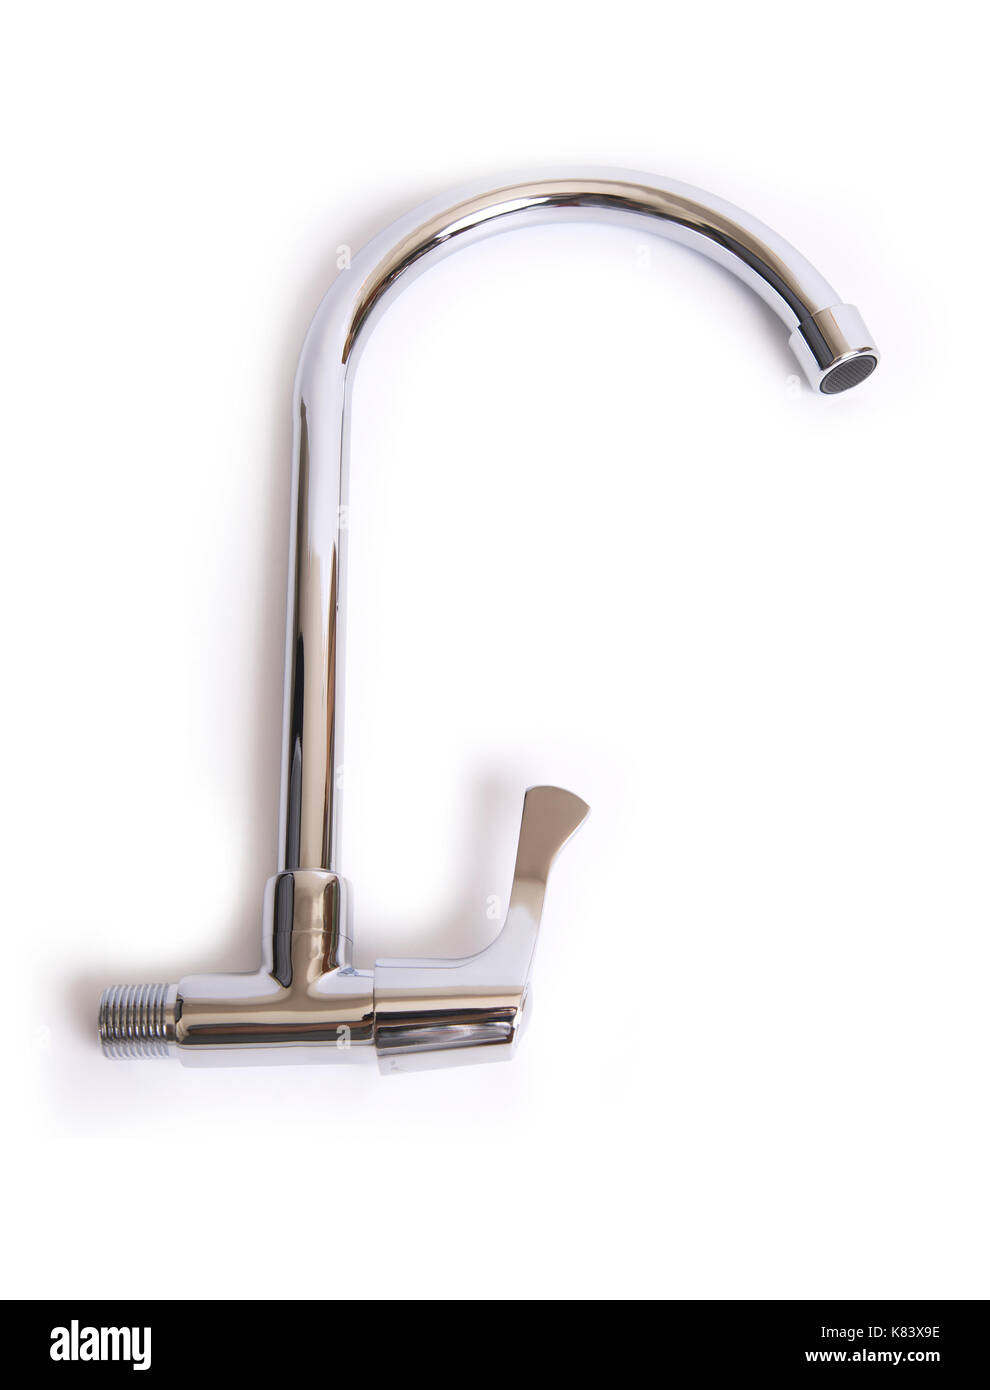 Long and bend stainless steel faucet for washing basin on white background. Stock Photo